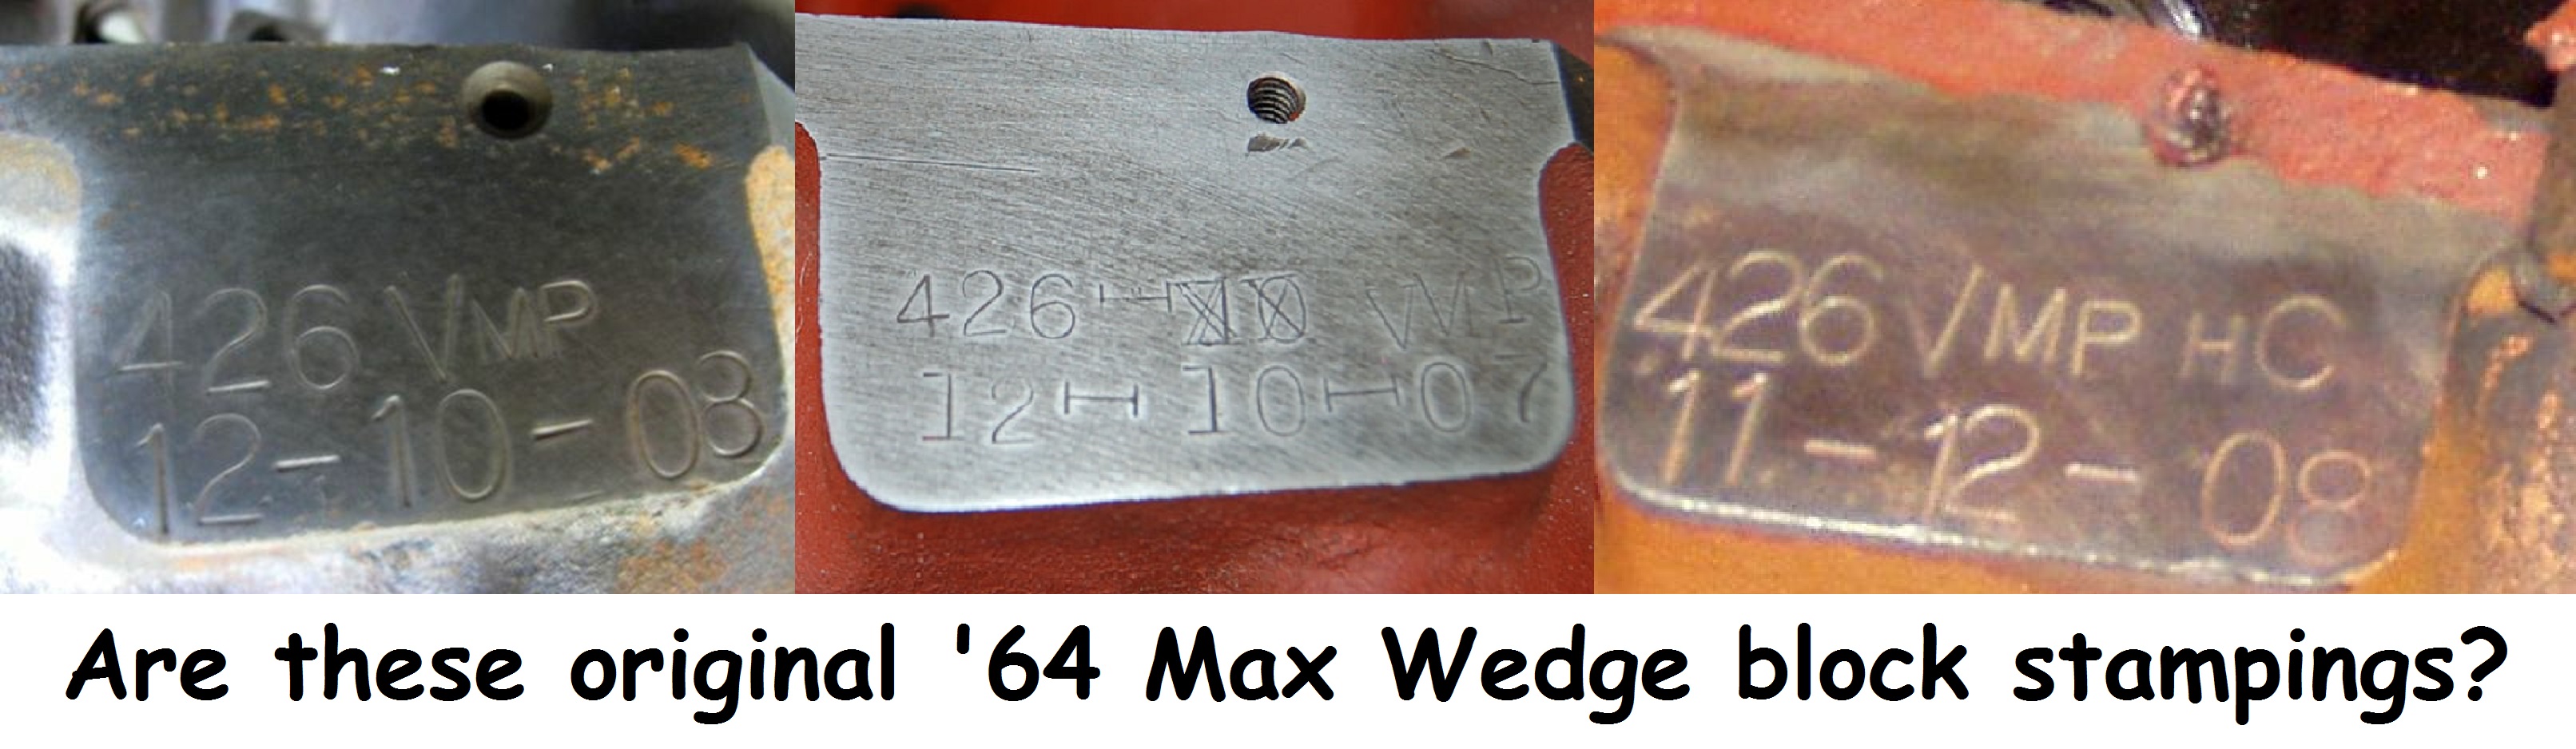 Attached picture 8411383-1964MaxWedge426VMP.jpg